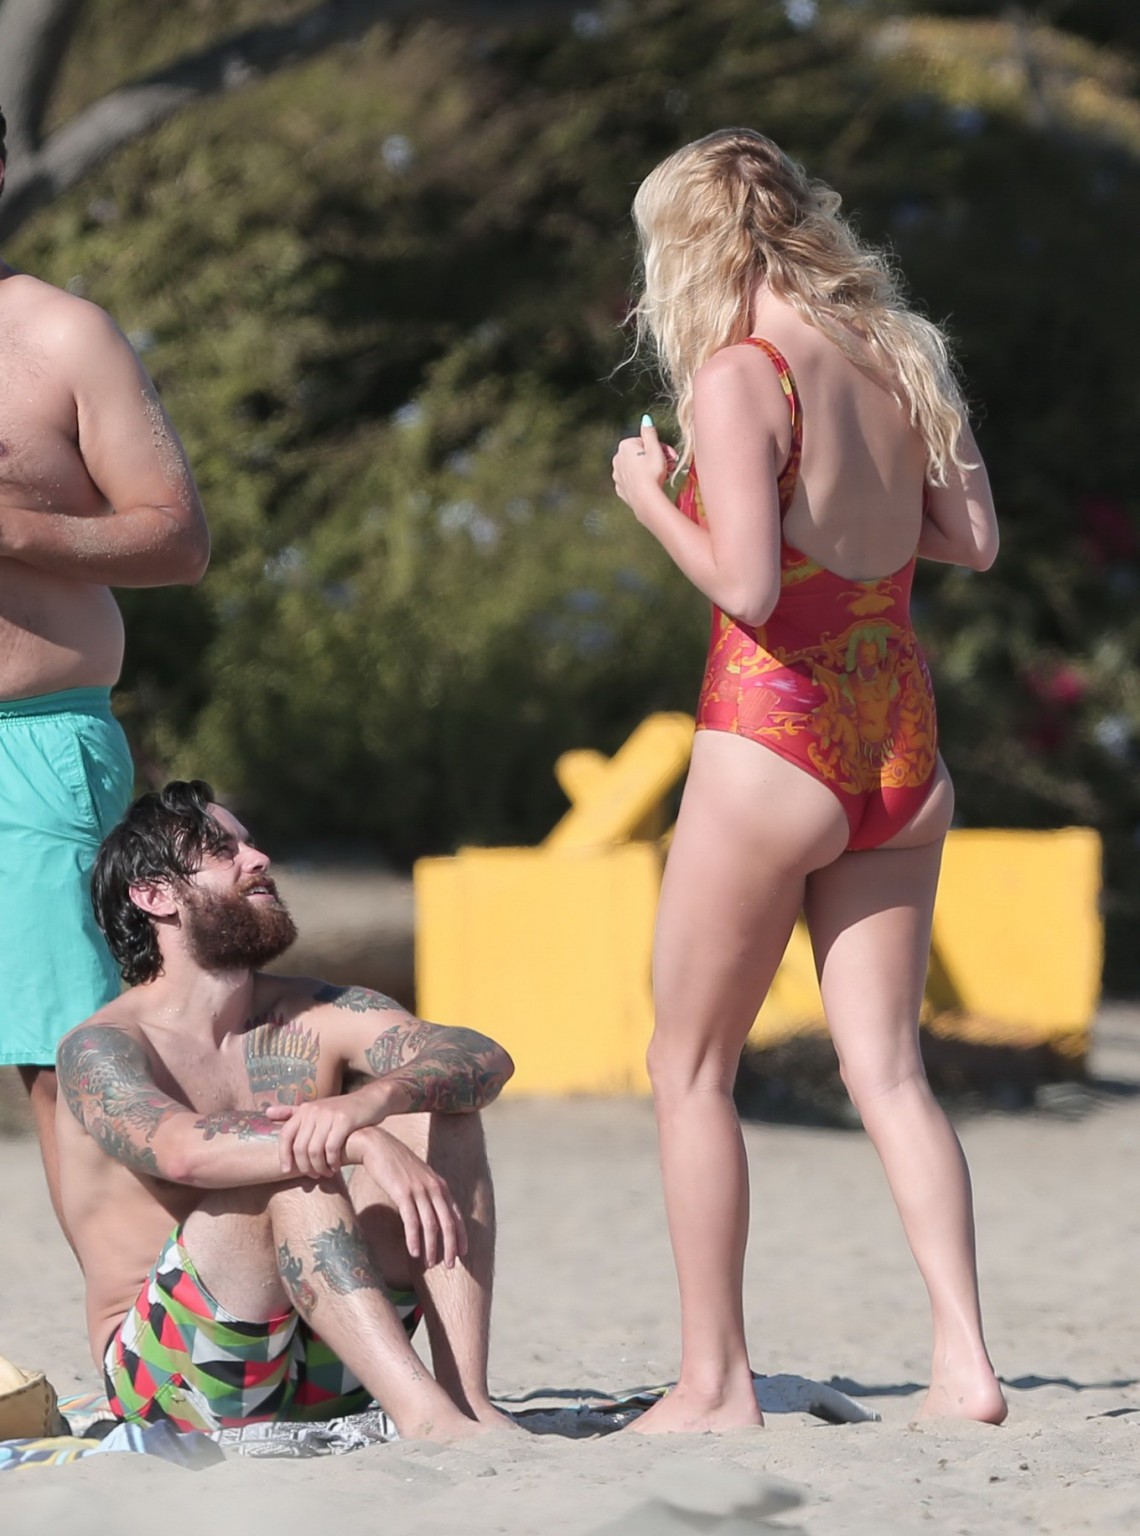 Kesha Sebert busty and booty in a red plunging swimsuit at the beach in Malibu #75187023